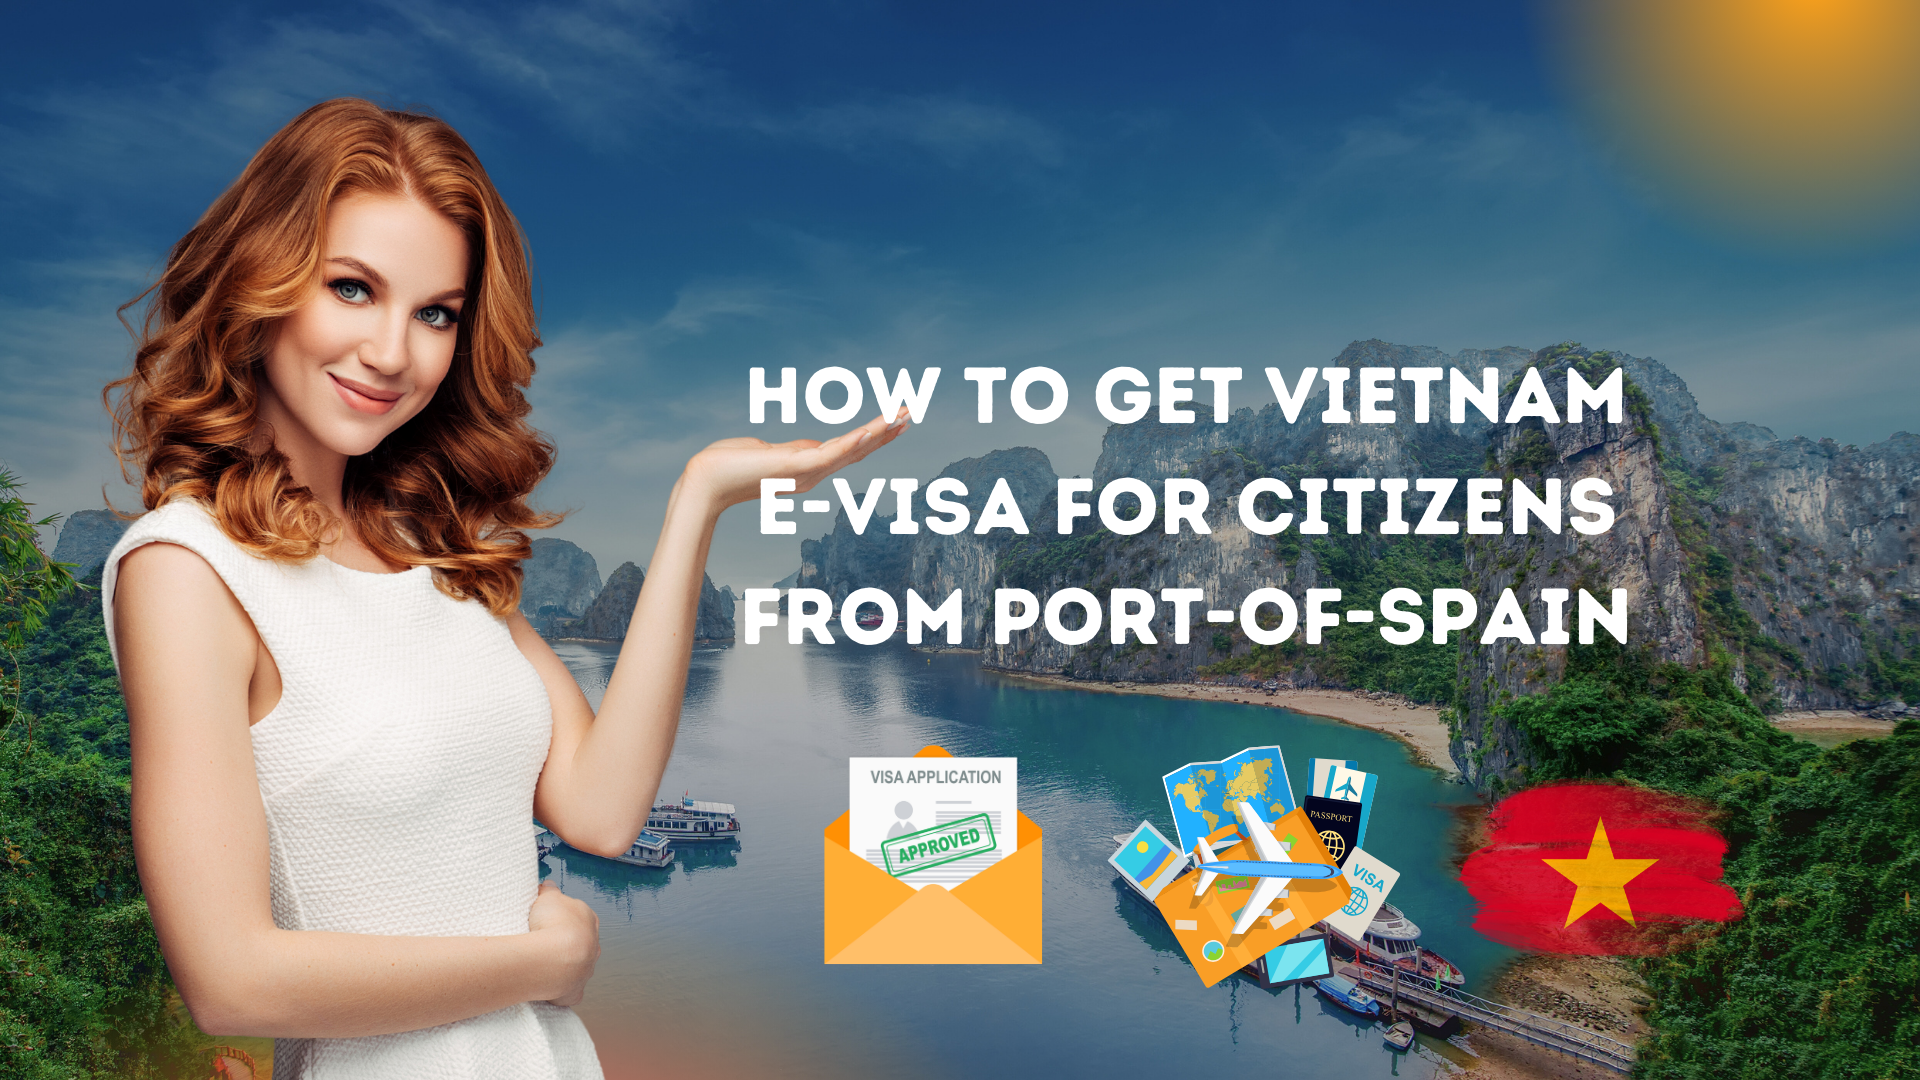 Vietnam Evisa for Citizens from Port-of-Spain